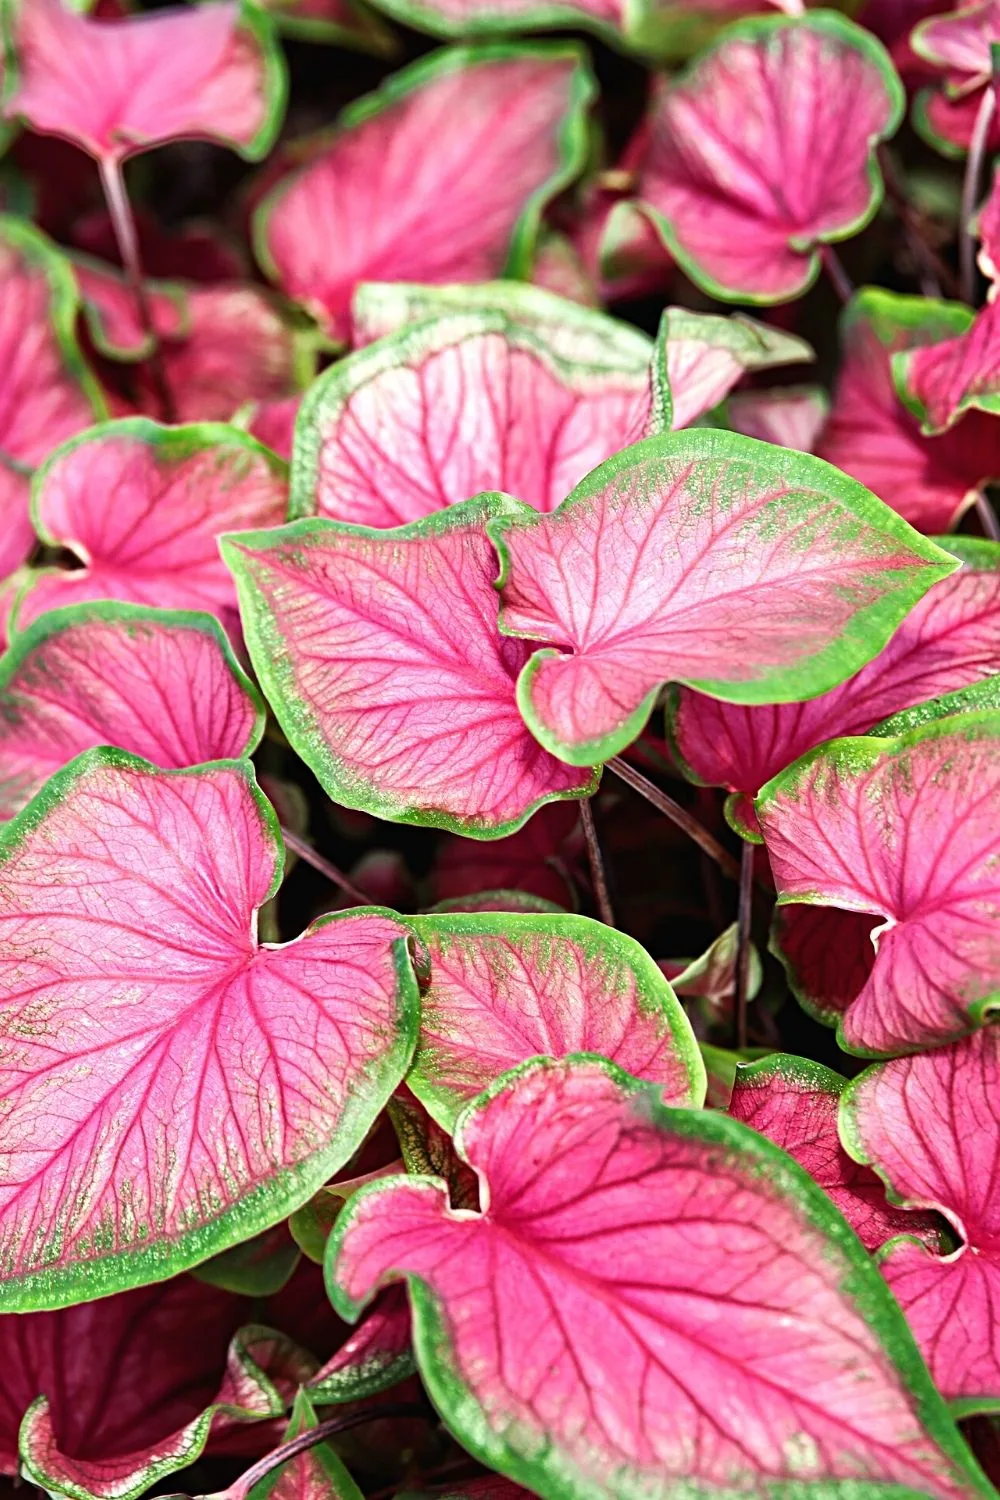 The Elephant Ears Caladium is another colorful plant you can grow on the east-facing side of the house